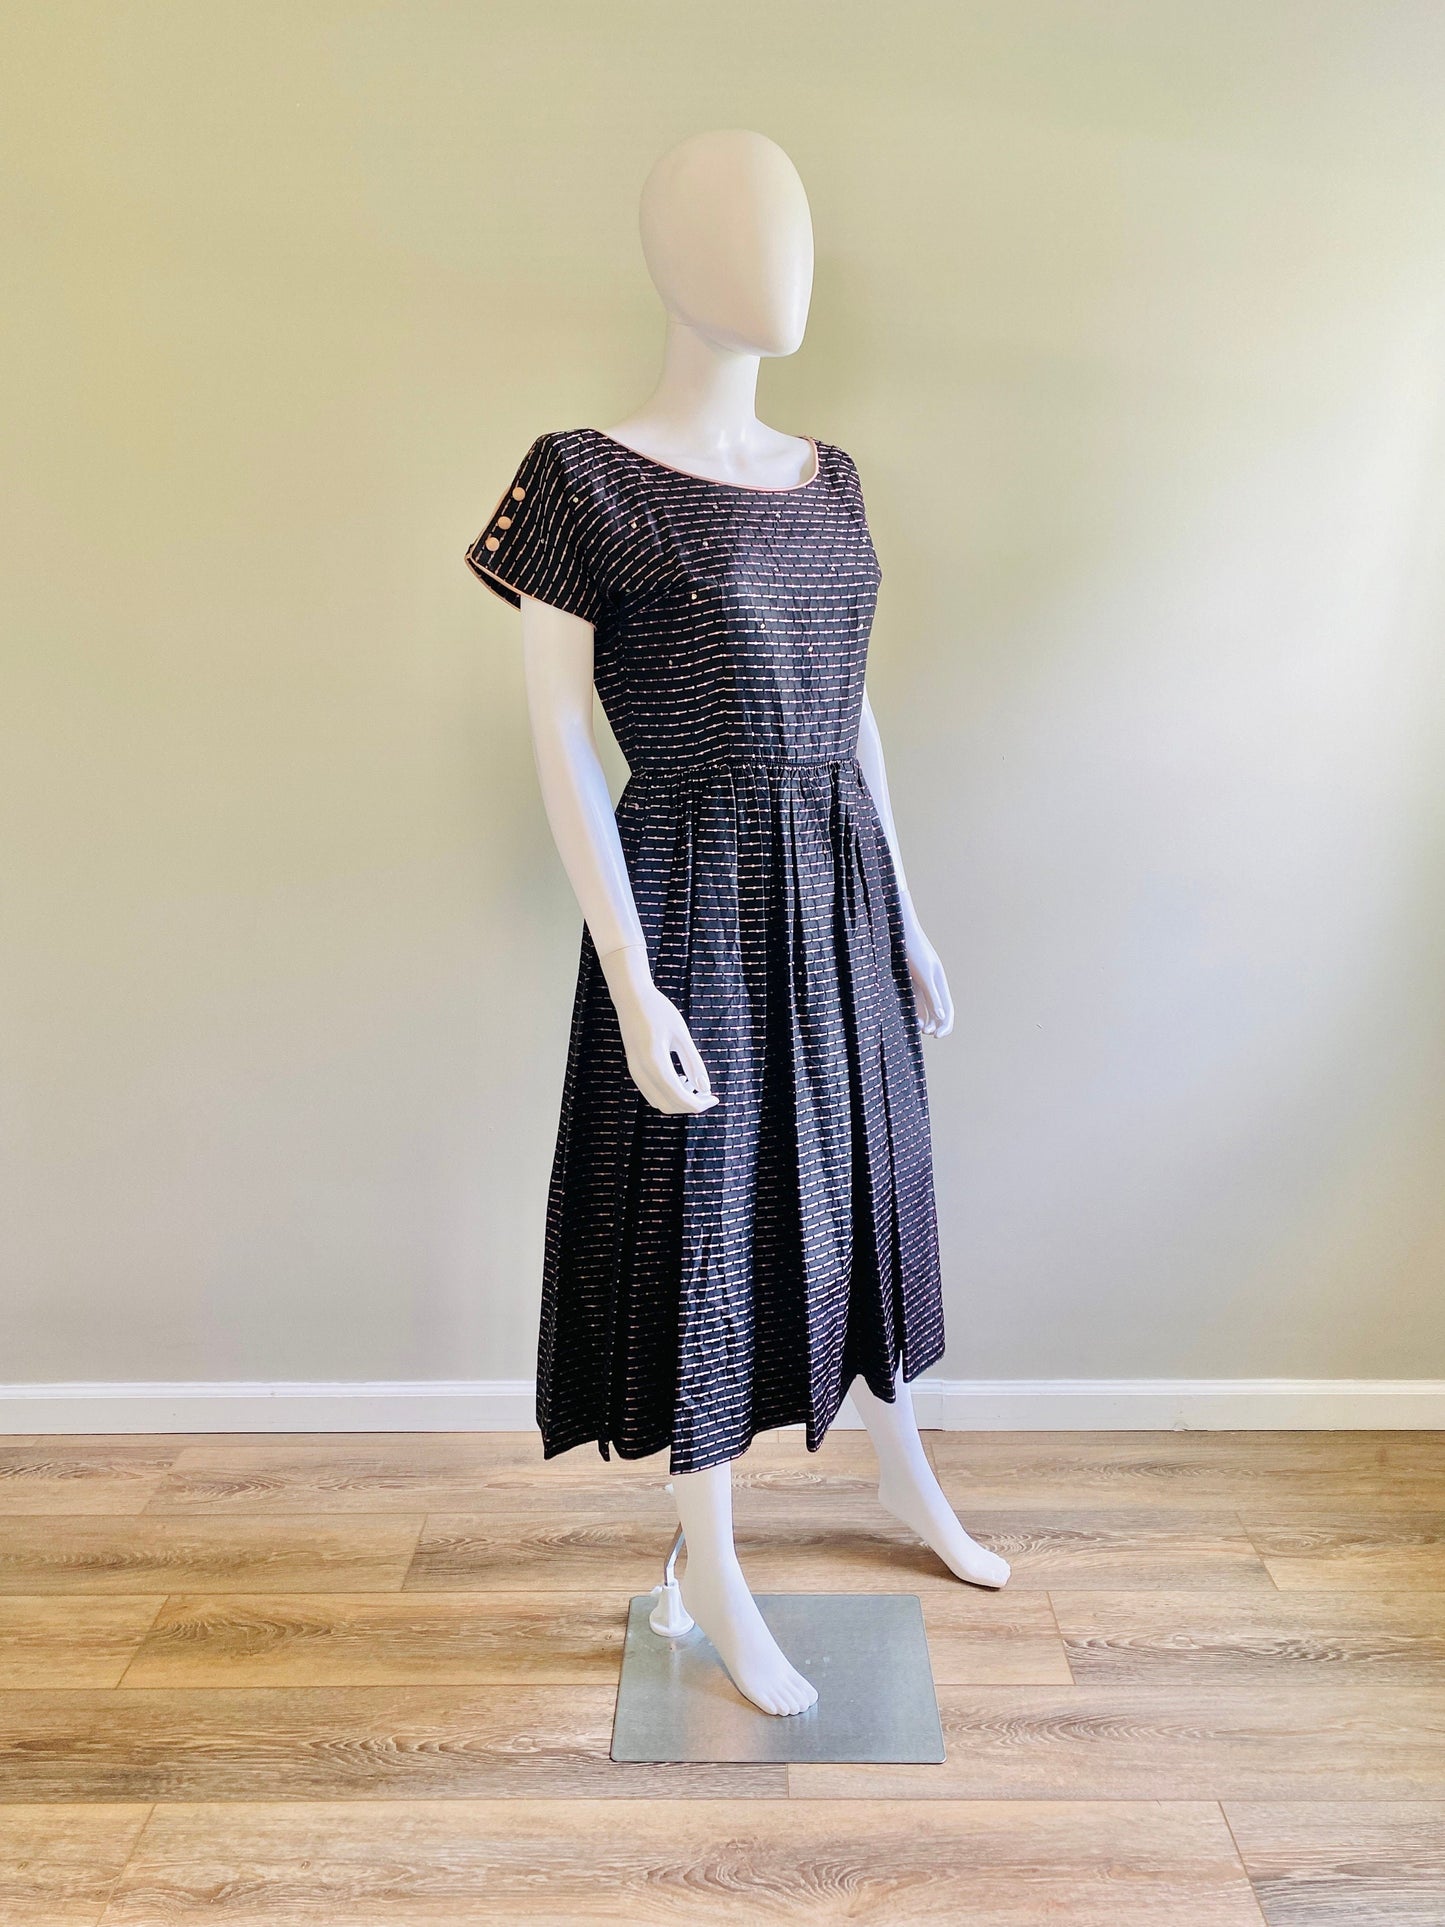 Vintage 1950s Black and Pink Fit and Flare Party Dress / 50s retro swing dress / Size M